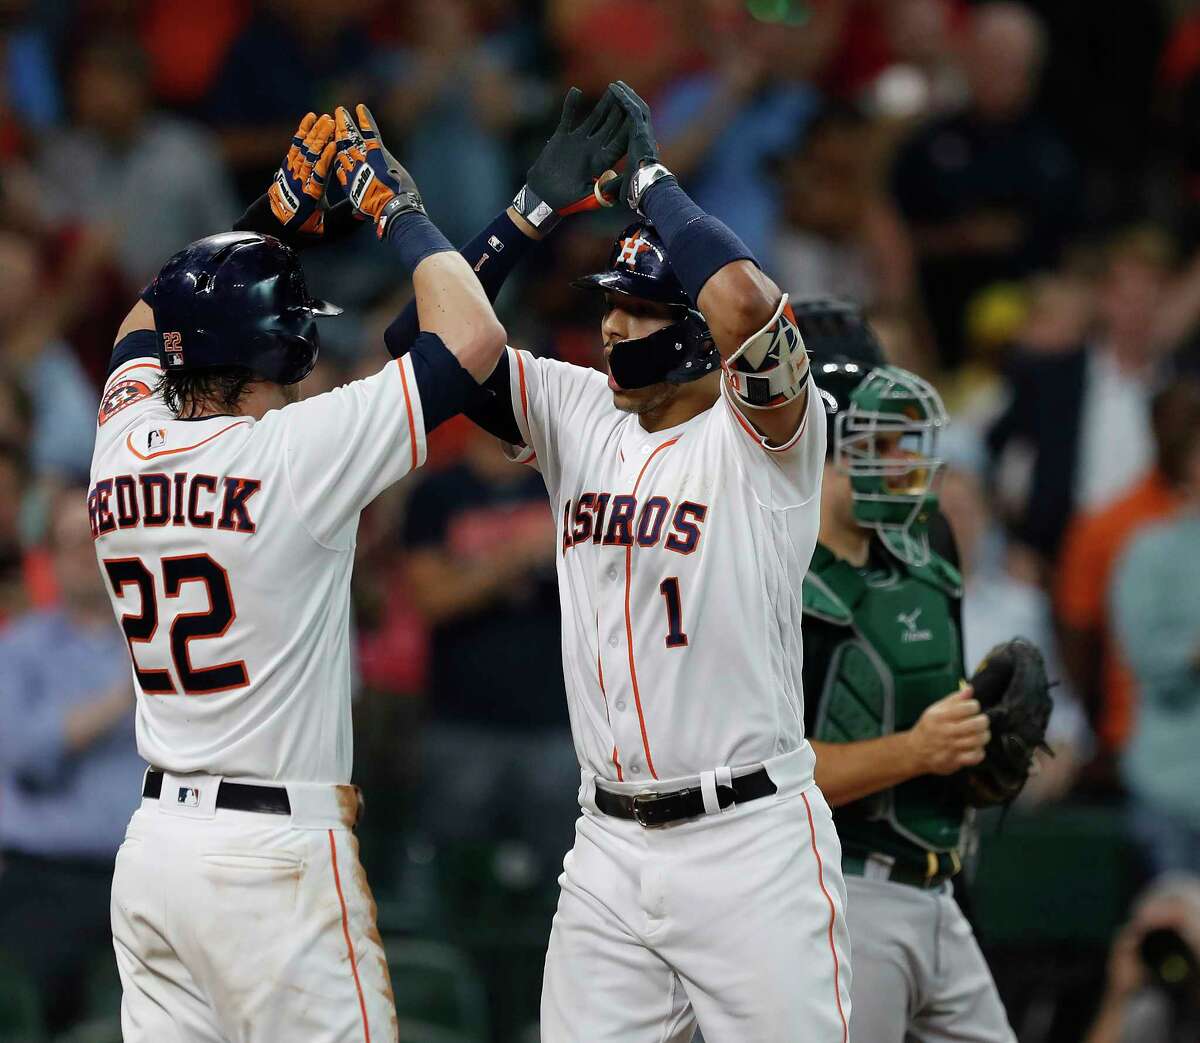 Houston Astros Back to Blue-and-Orange Uniforms in 2013